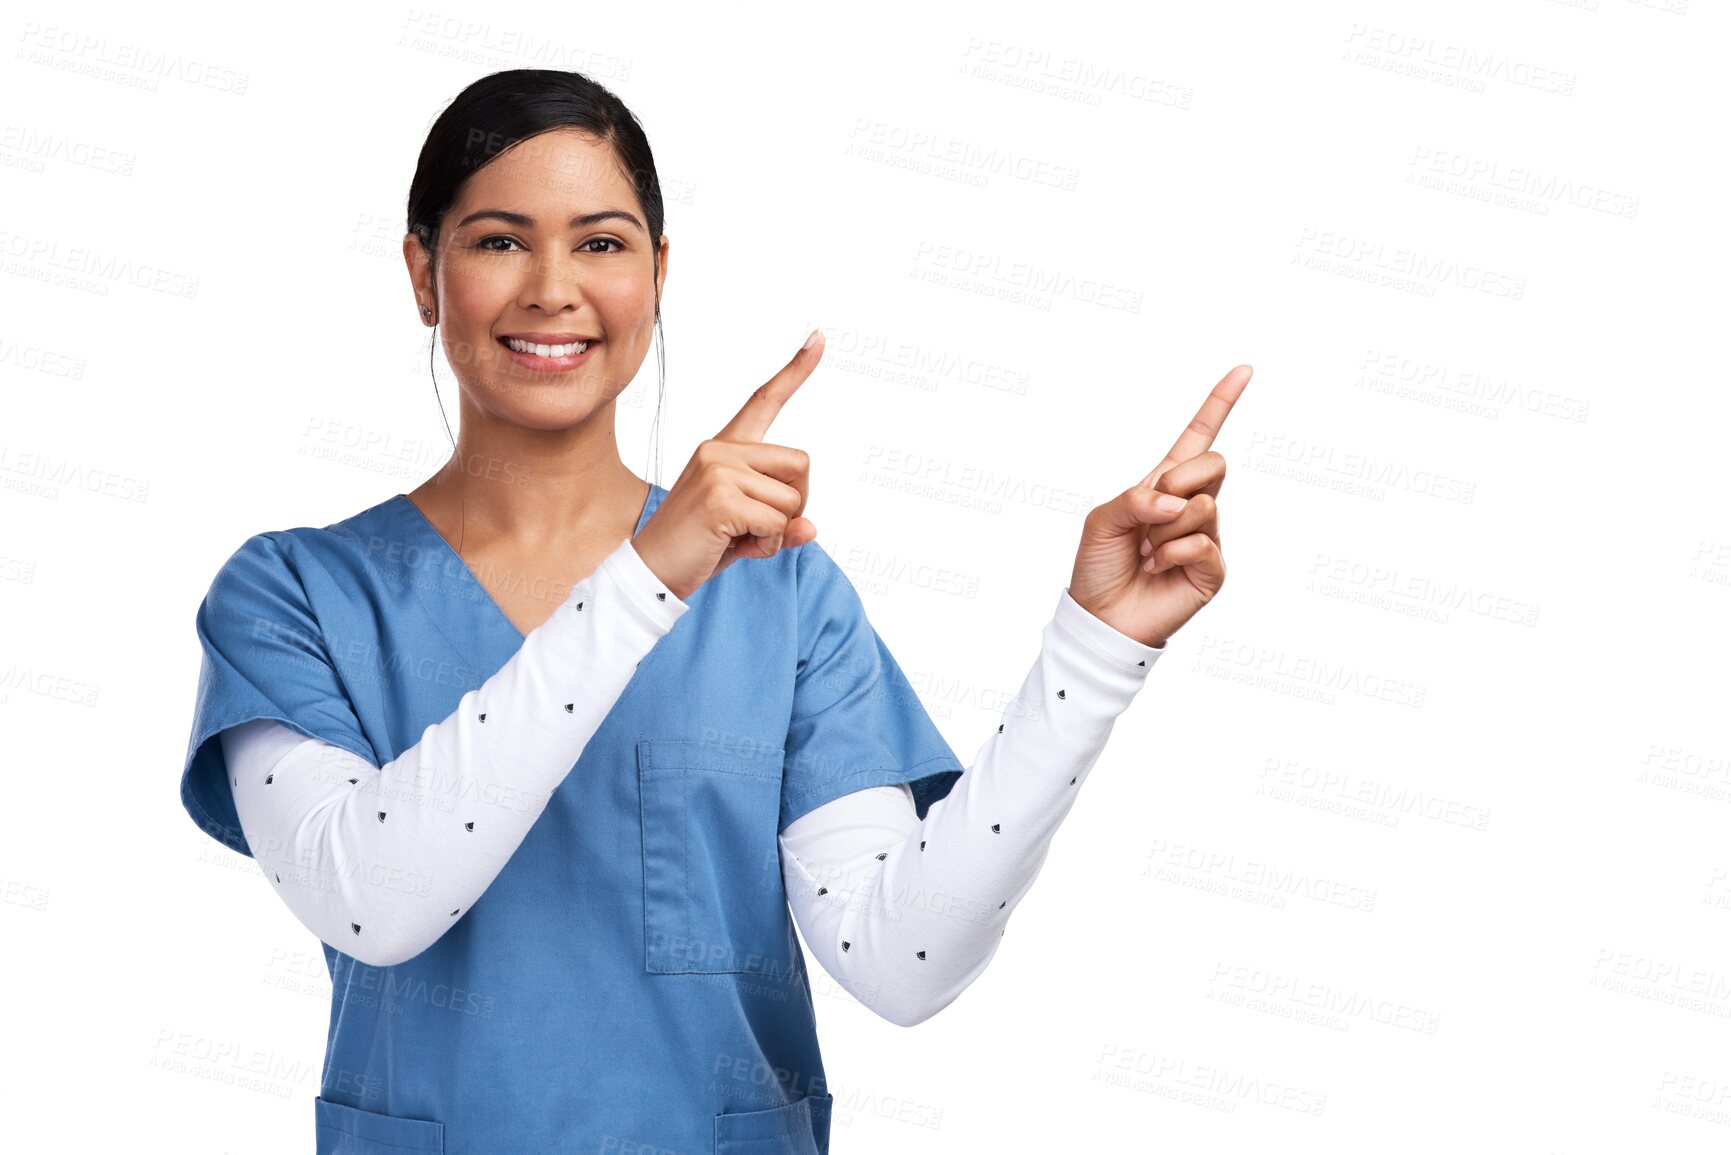 Buy stock photo Portrait, smile and woman nurse pointing, isolated on transparent png background in health care promo. Caregiver, happy female medical expert or doctor showing healthcare tips or advice announcement.